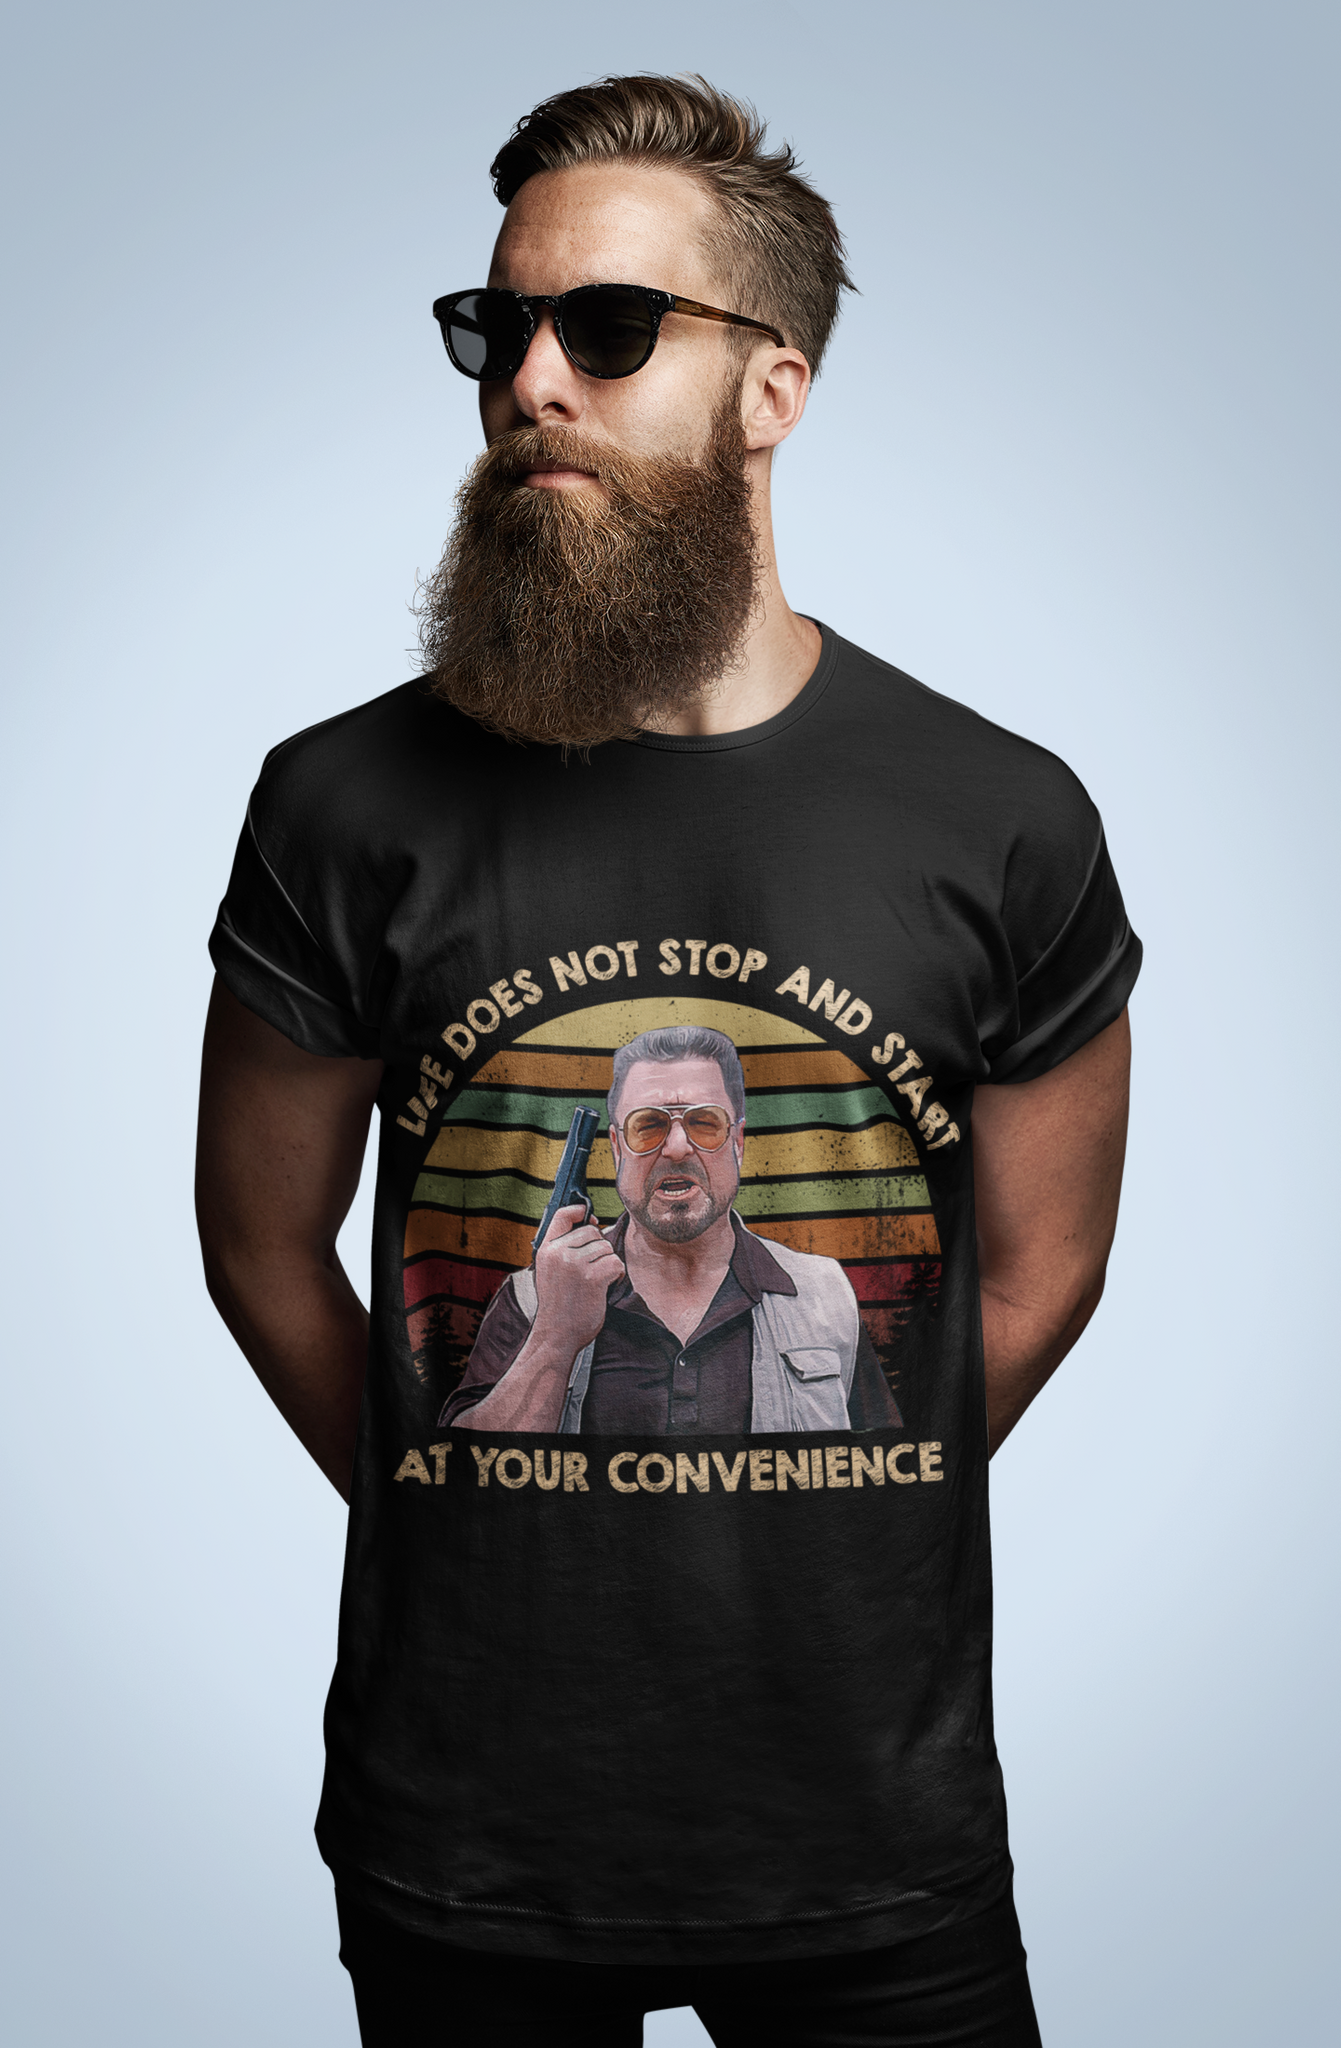 The Big Lebowski T Shirt, Walter Sobchak T Shirt, Life Doesnt Stop And Start At Your Convenience Tshirt